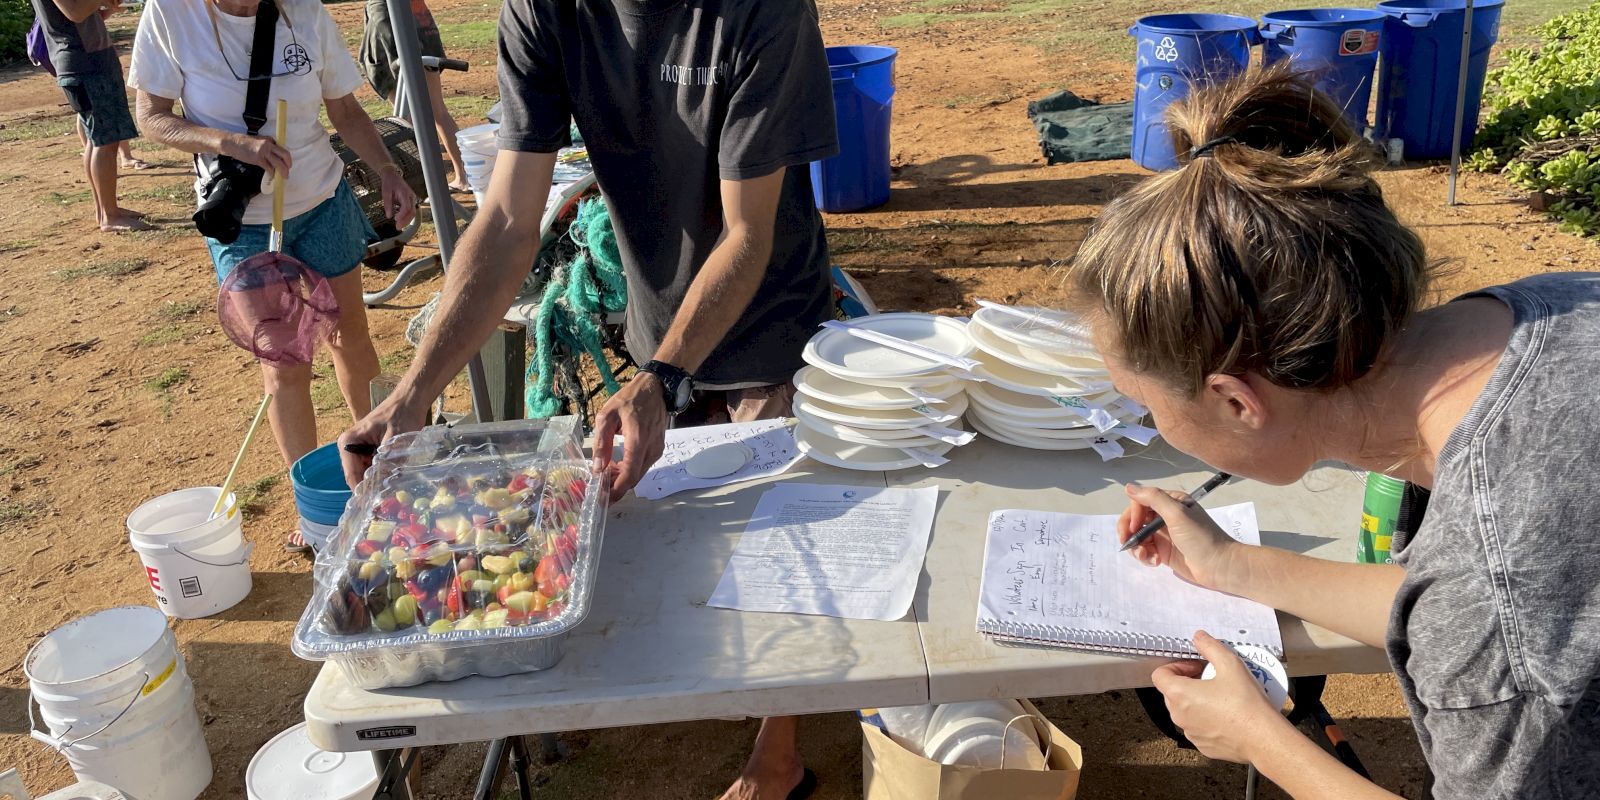 Two people work at an outdoor event table with trays, plates, and a clipboard. Buckets and blue bins are in the background. The sentence ends.